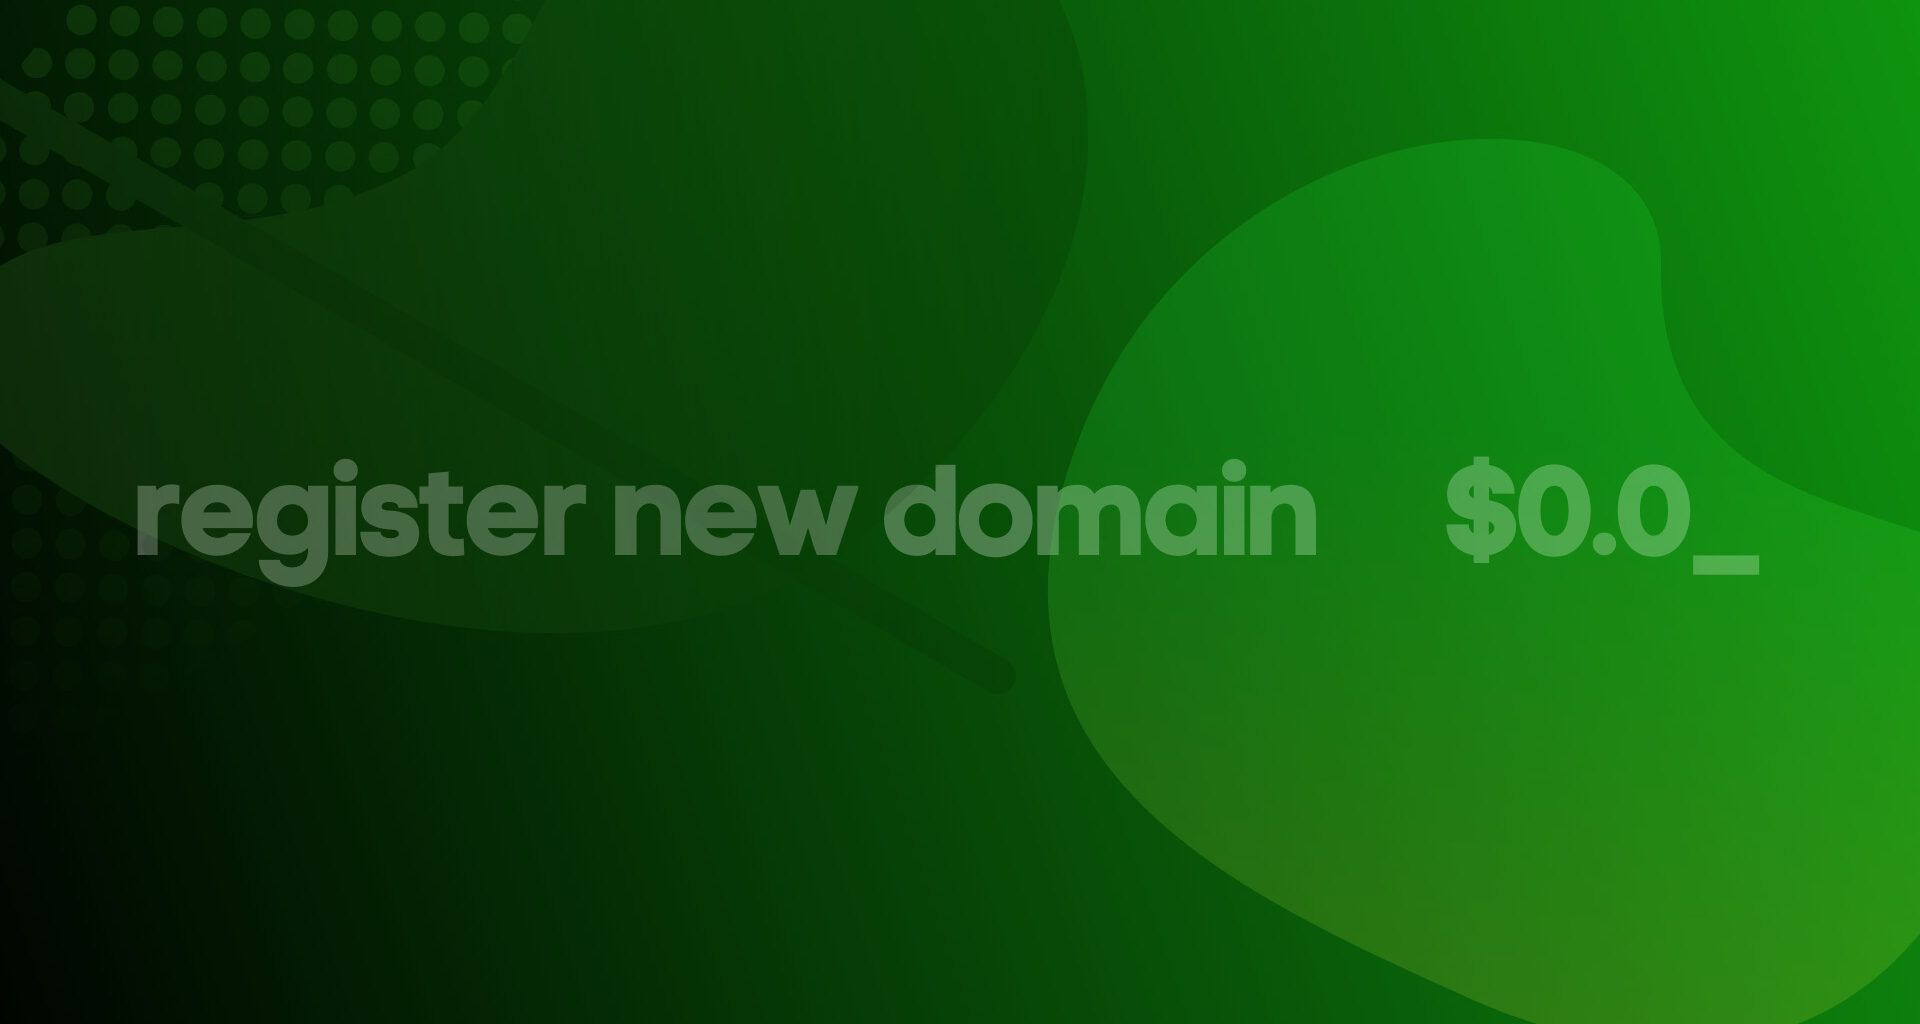 How to Get a Domain Name for Free